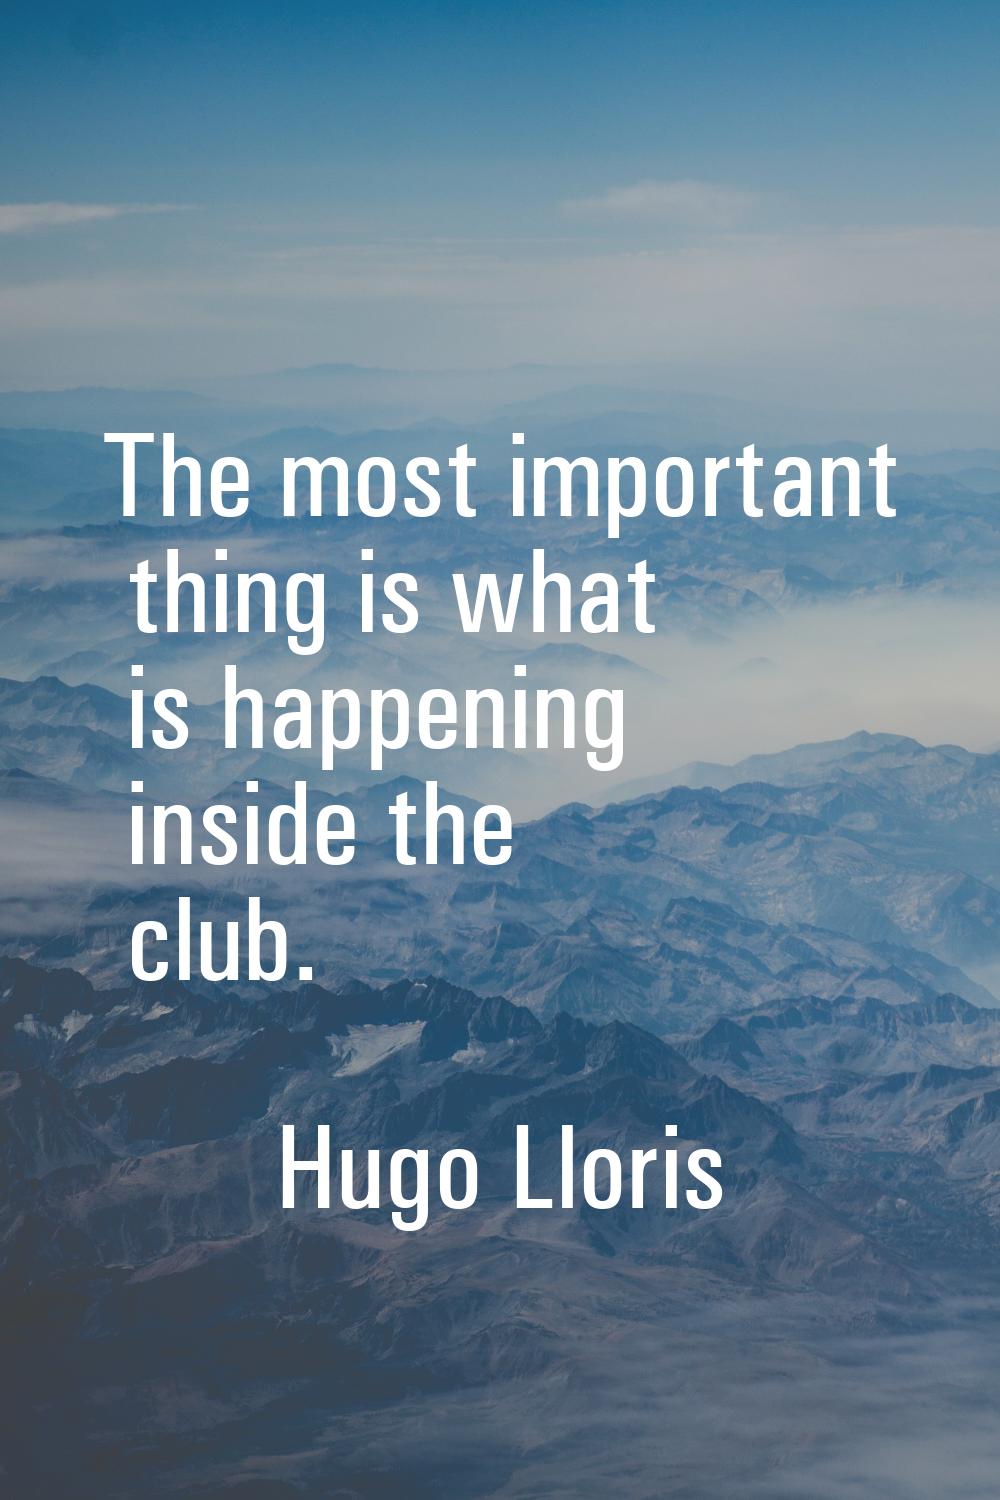 The most important thing is what is happening inside the club.